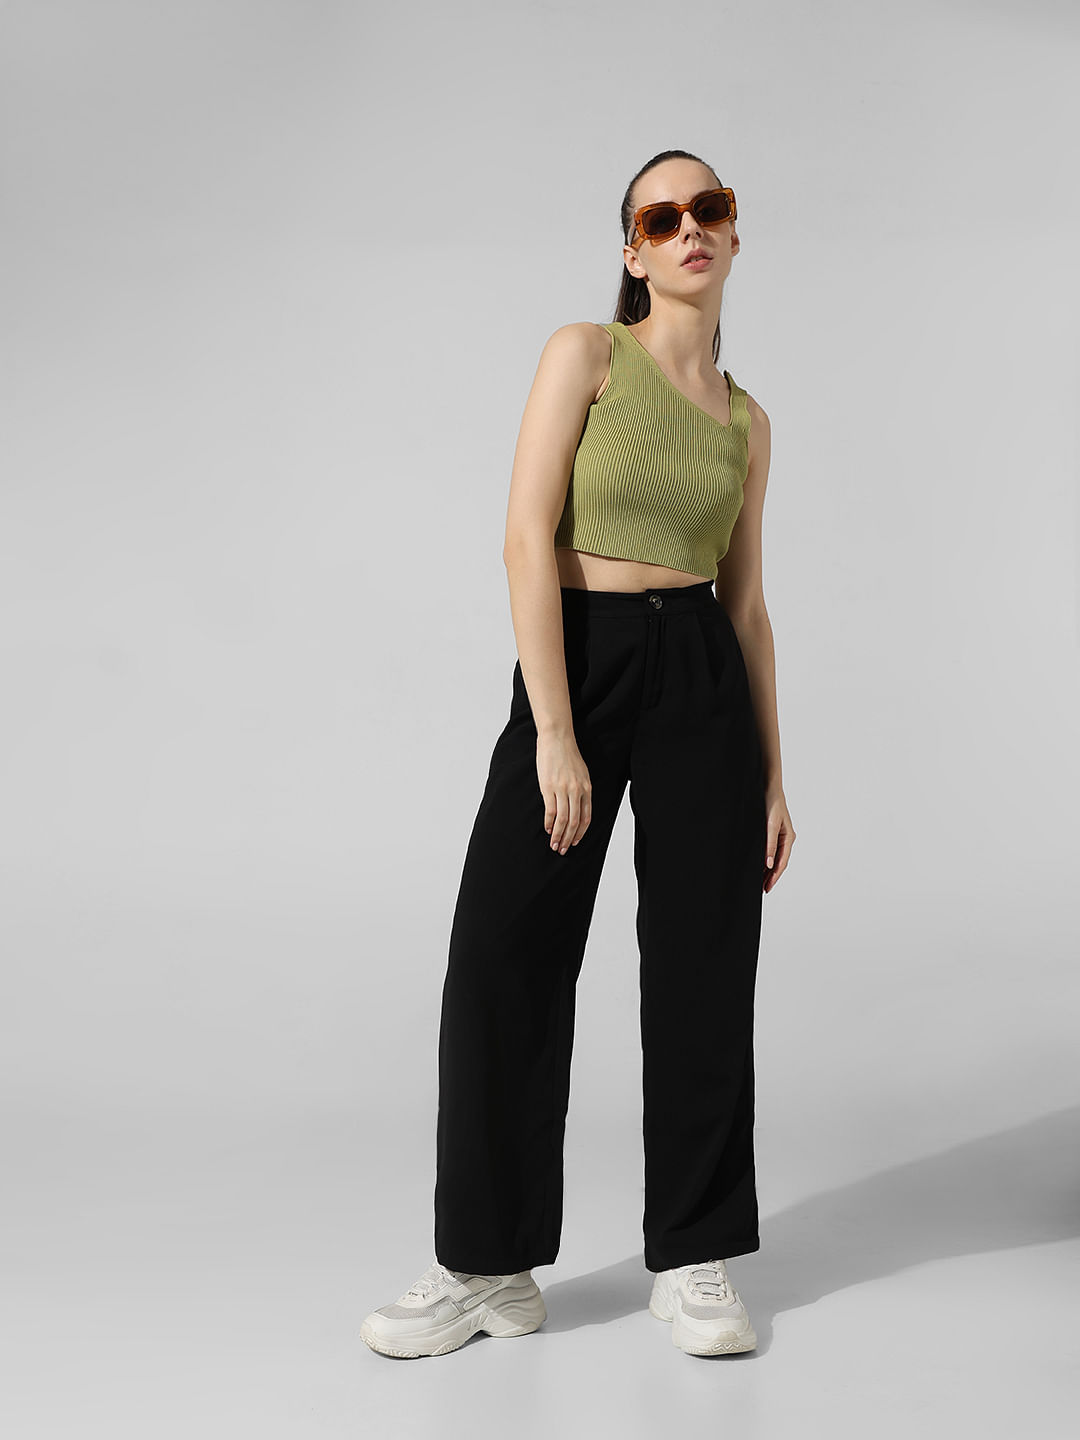 Womens Figure Print Crop Top And Wide Leg Set Out Sleeveless Two Piece Pants  With High Waist And Loose Fit For Summer And Spring From Hhepinggee, $21.26  | DHgate.Com